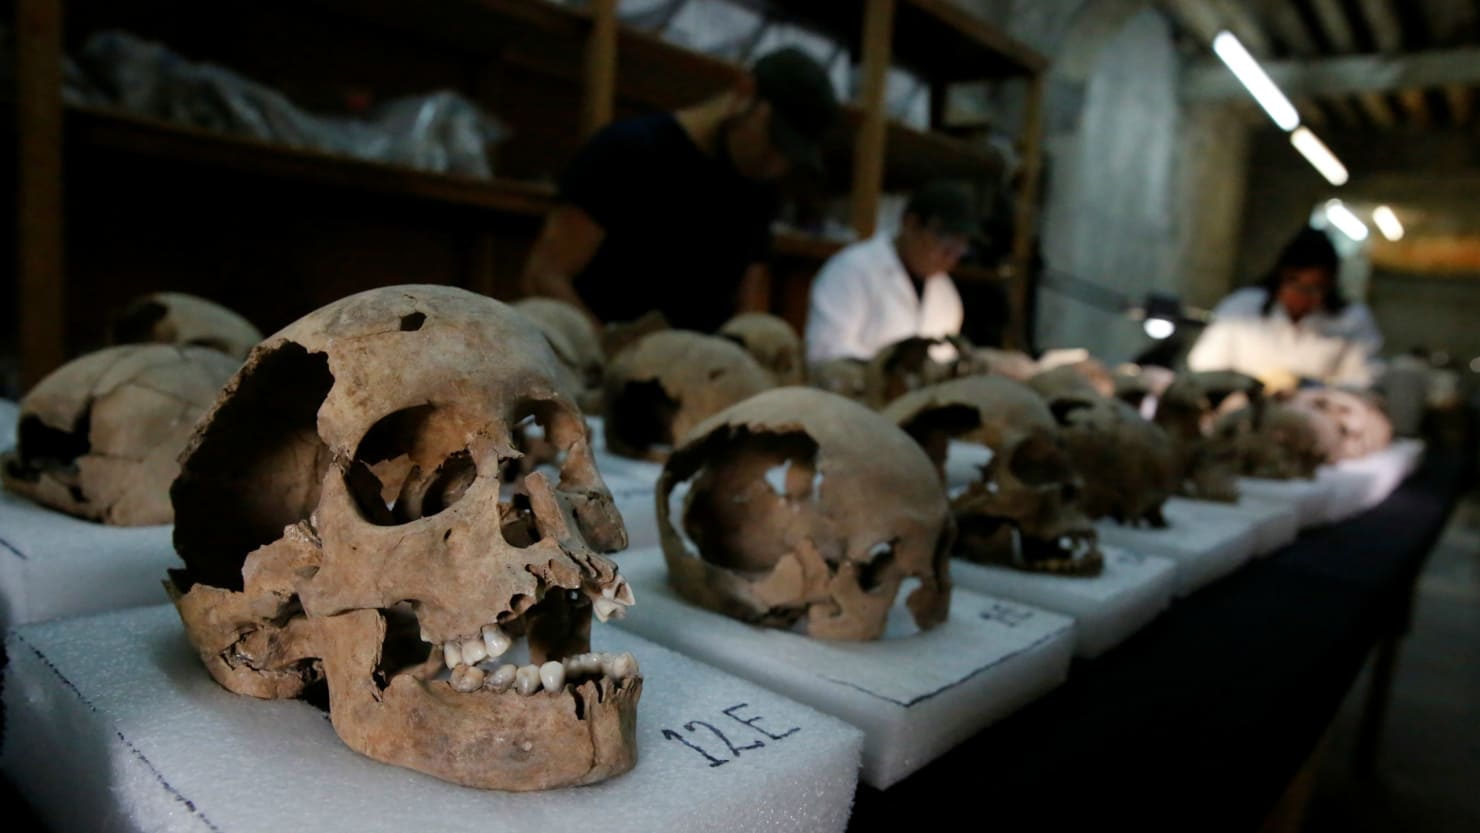 Tower Of Skulls Found By Researchers in Mexico